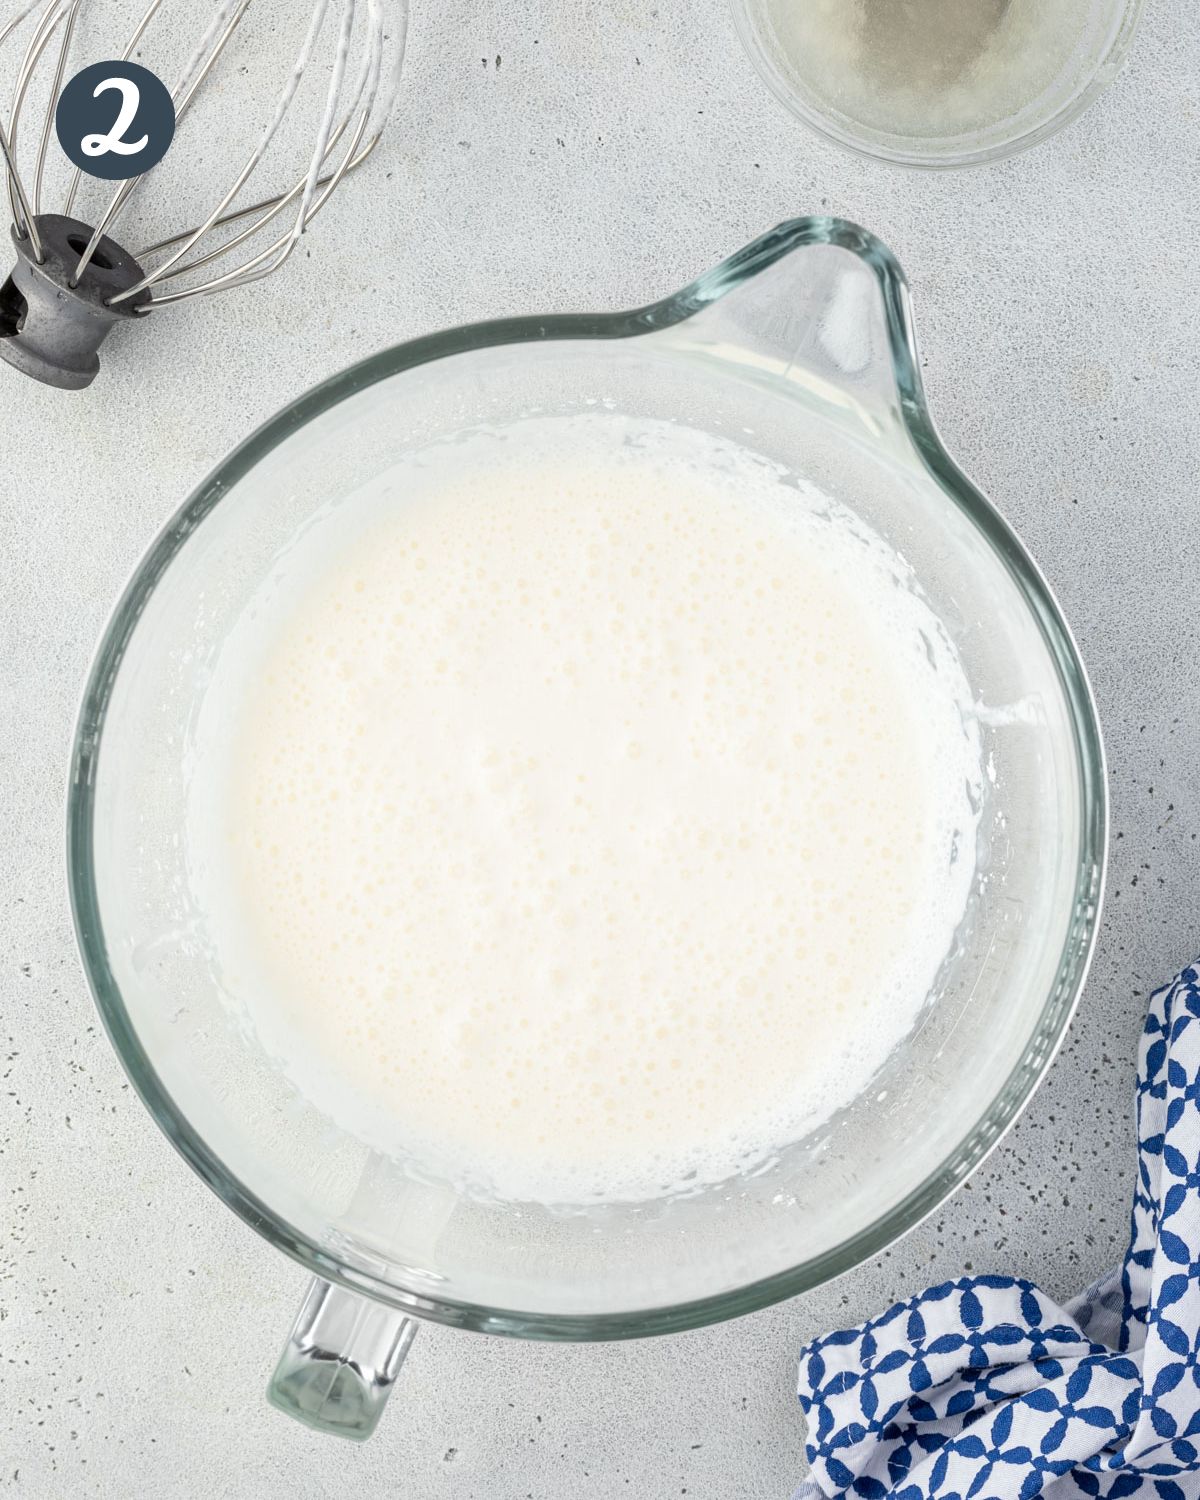 Slightly thickened and foamy dairy in a large glass mixing bowl.